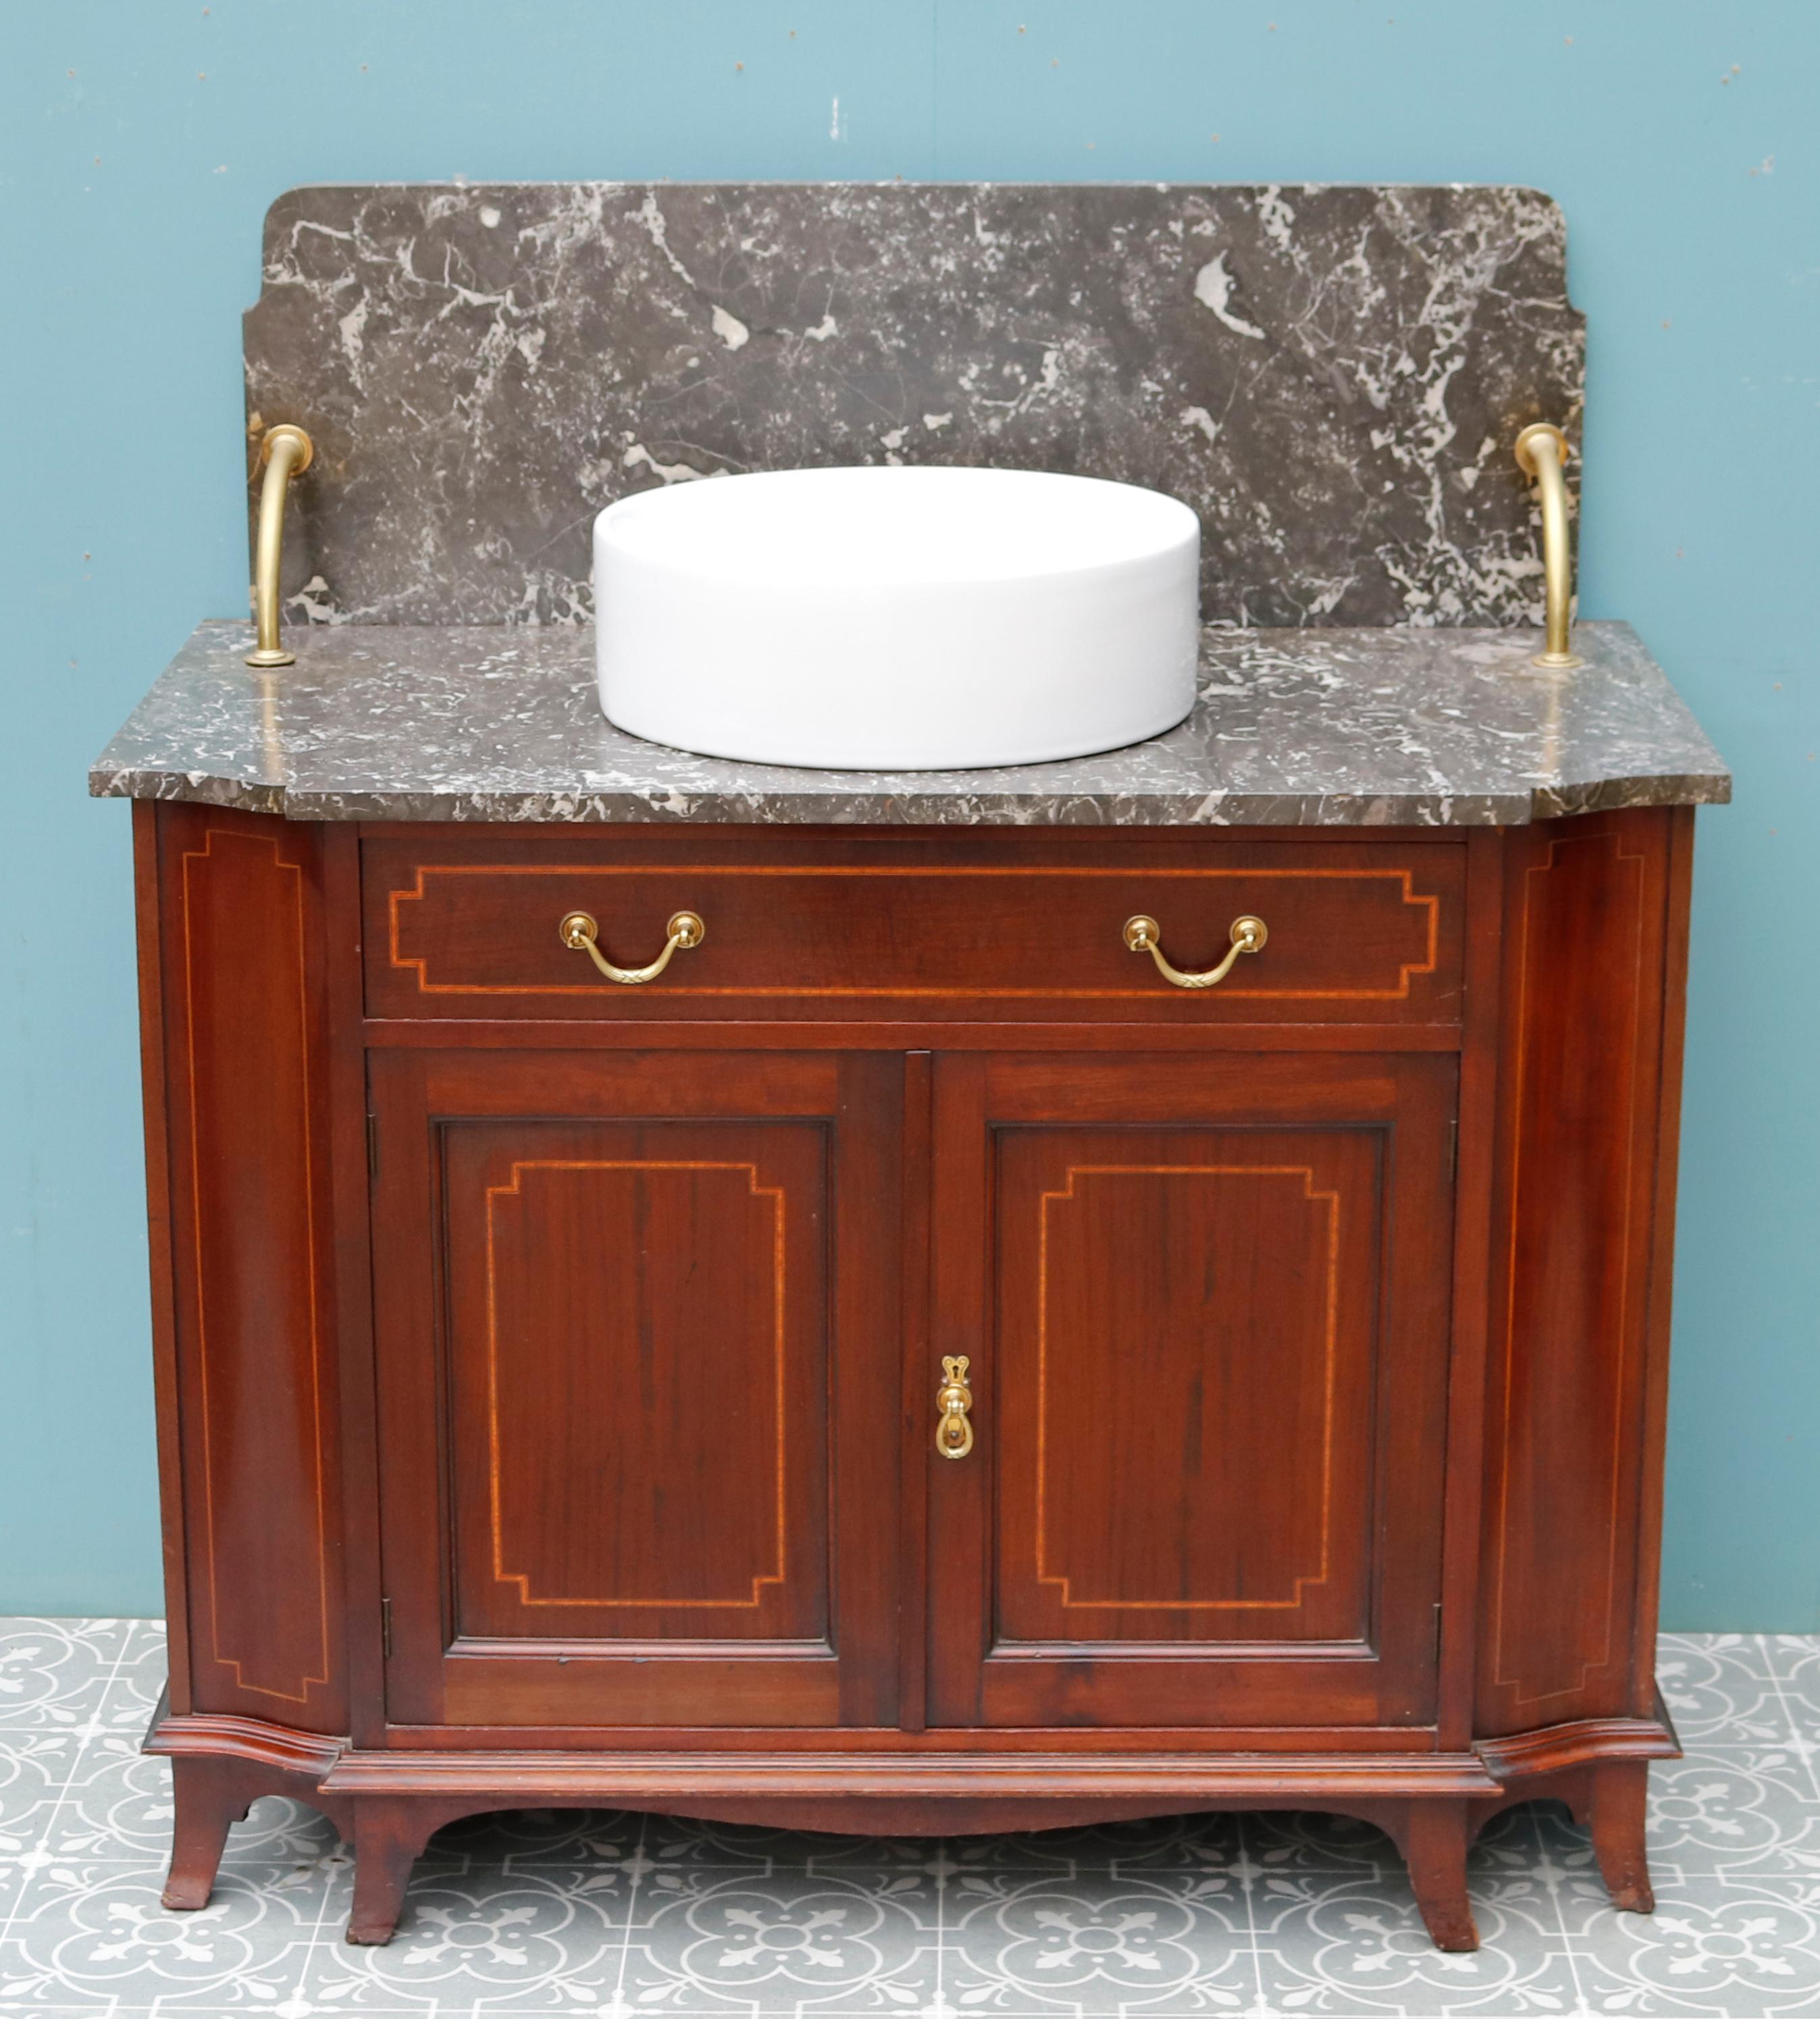 An Edwardian style washstand with a veined marble top and splash back. The washstand is supplied with a modern ceramic bowl.

Additional Dimensions

Overall Height 106.5 cm

Height to counter 76 cm

Width 99 cm

Depth 51.5 cm.